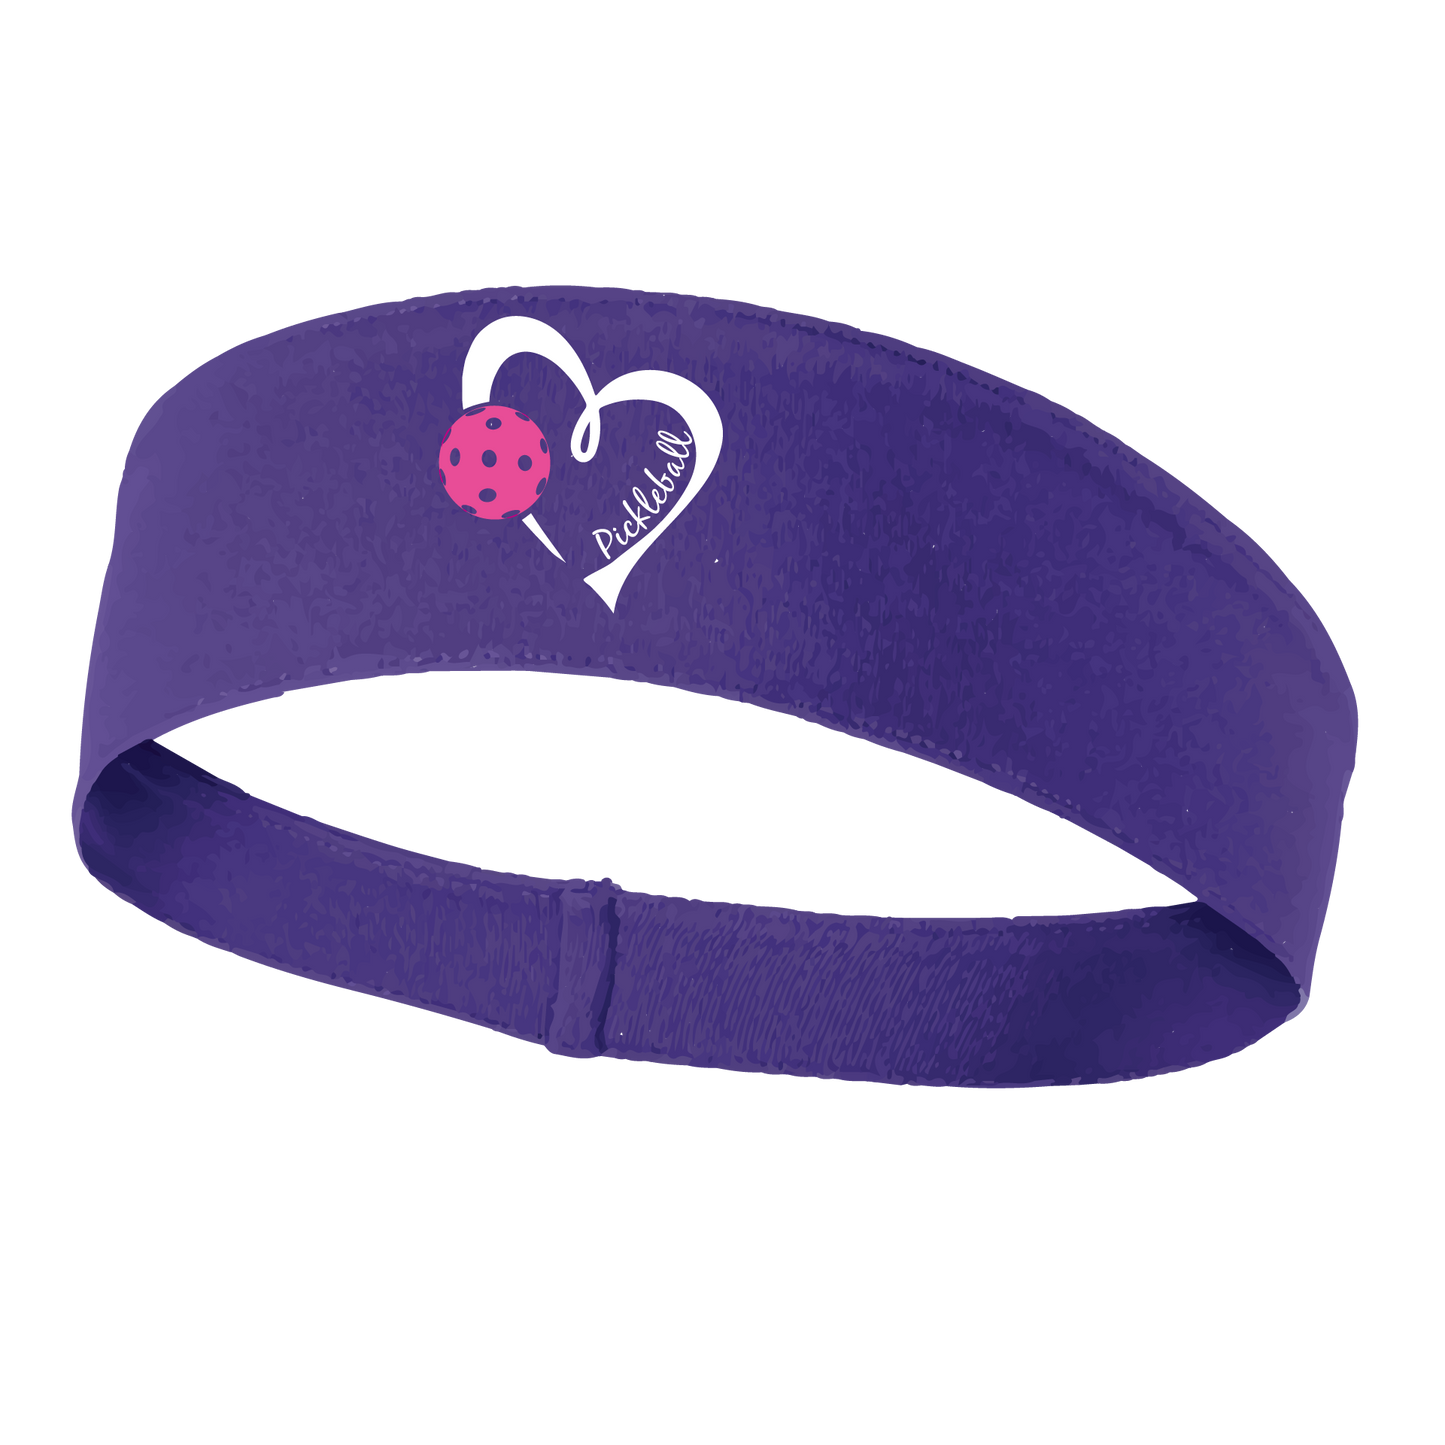 Pickleball Headband Design: Pickleball Love Heart and Ball - Design is White with Pink Ball  This fun, pickleball designed, moisture-wicking headband narrows in the back to fit more securely. Single-needle top-stitched edging. These headbands come in a variety of colors. Truly shows your love for the sport of pickleball!! 